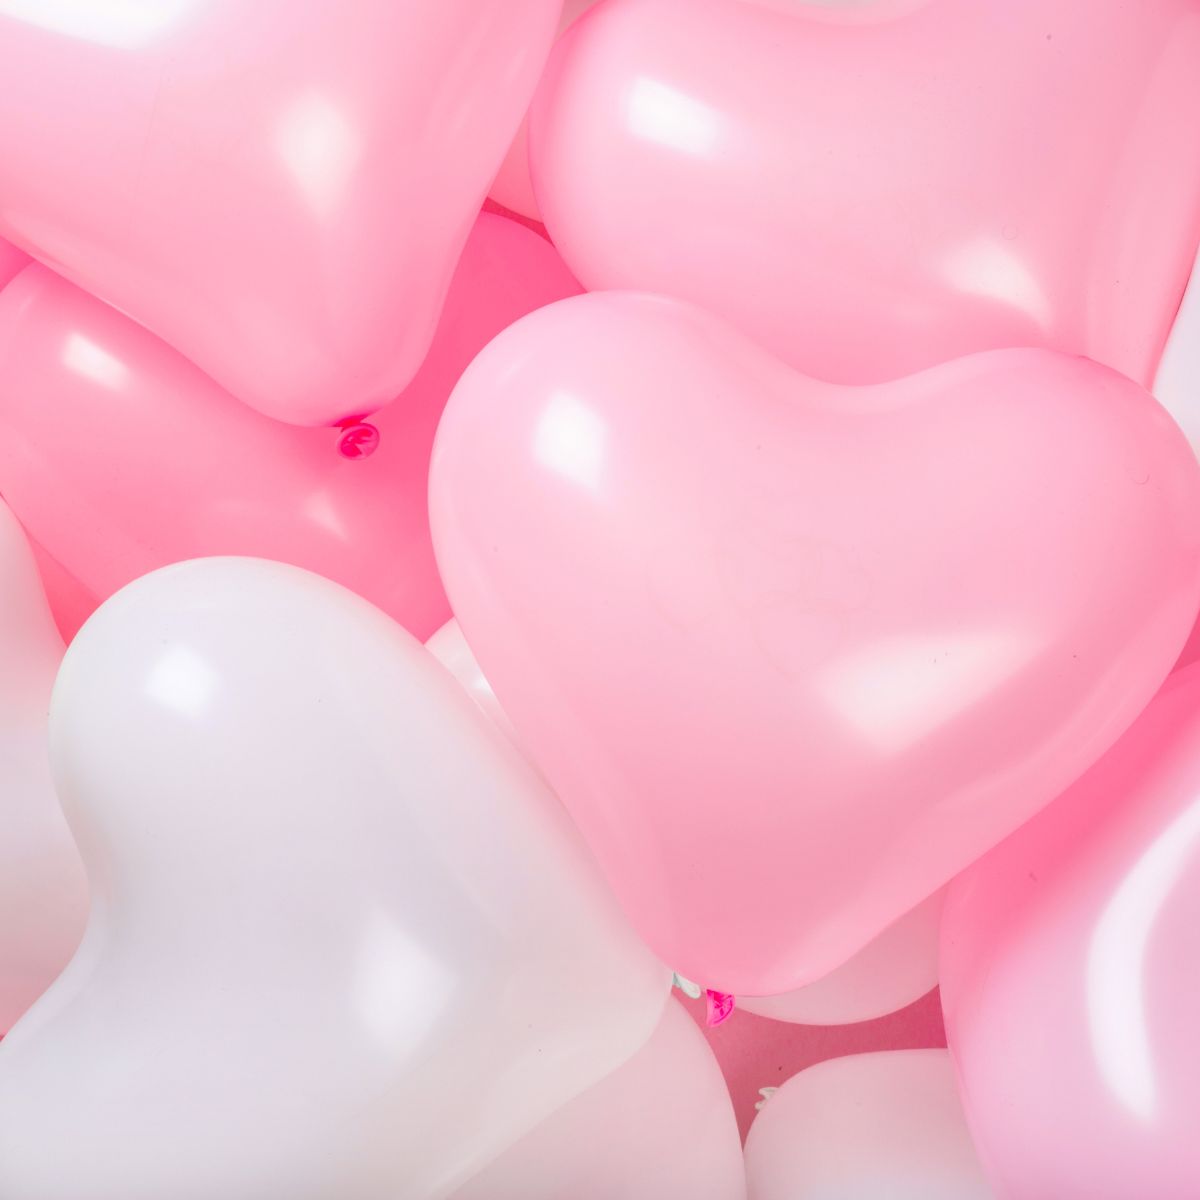 heart shaped balloons in pink and white